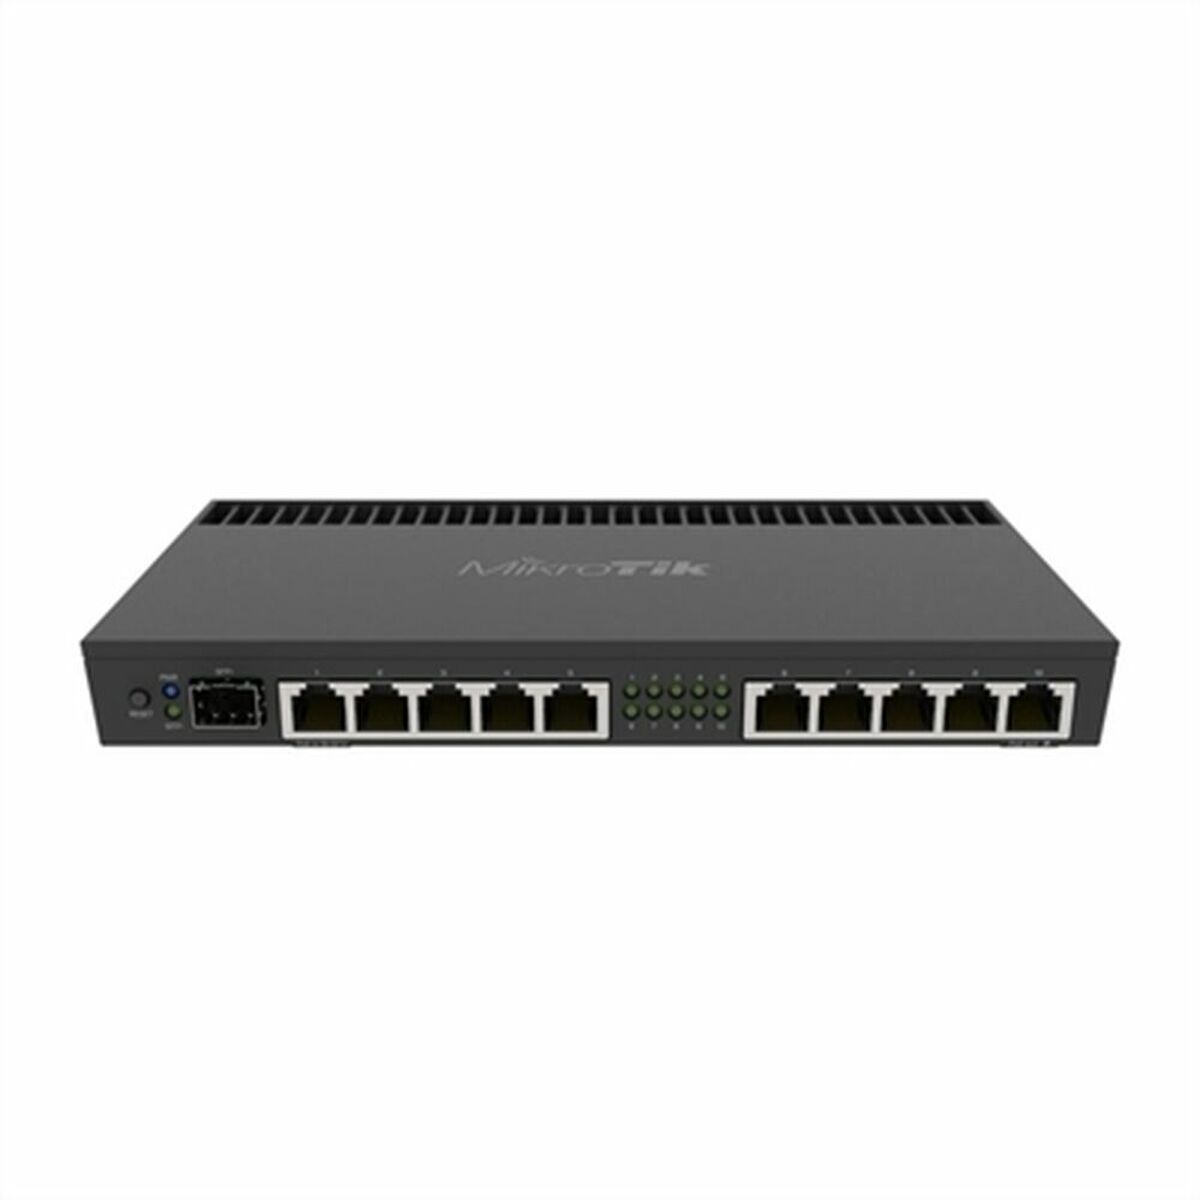 Router Mikrotik RB4011iGS+RM, Mikrotik, Computing, Network devices, router-mikrotik-rb4011igs-rm, Brand_Mikrotik, category-reference-2609, category-reference-2803, category-reference-2826, category-reference-t-19685, category-reference-t-19914, Condition_NEW, networks/wiring, Price_200 - 300, Teleworking, RiotNook